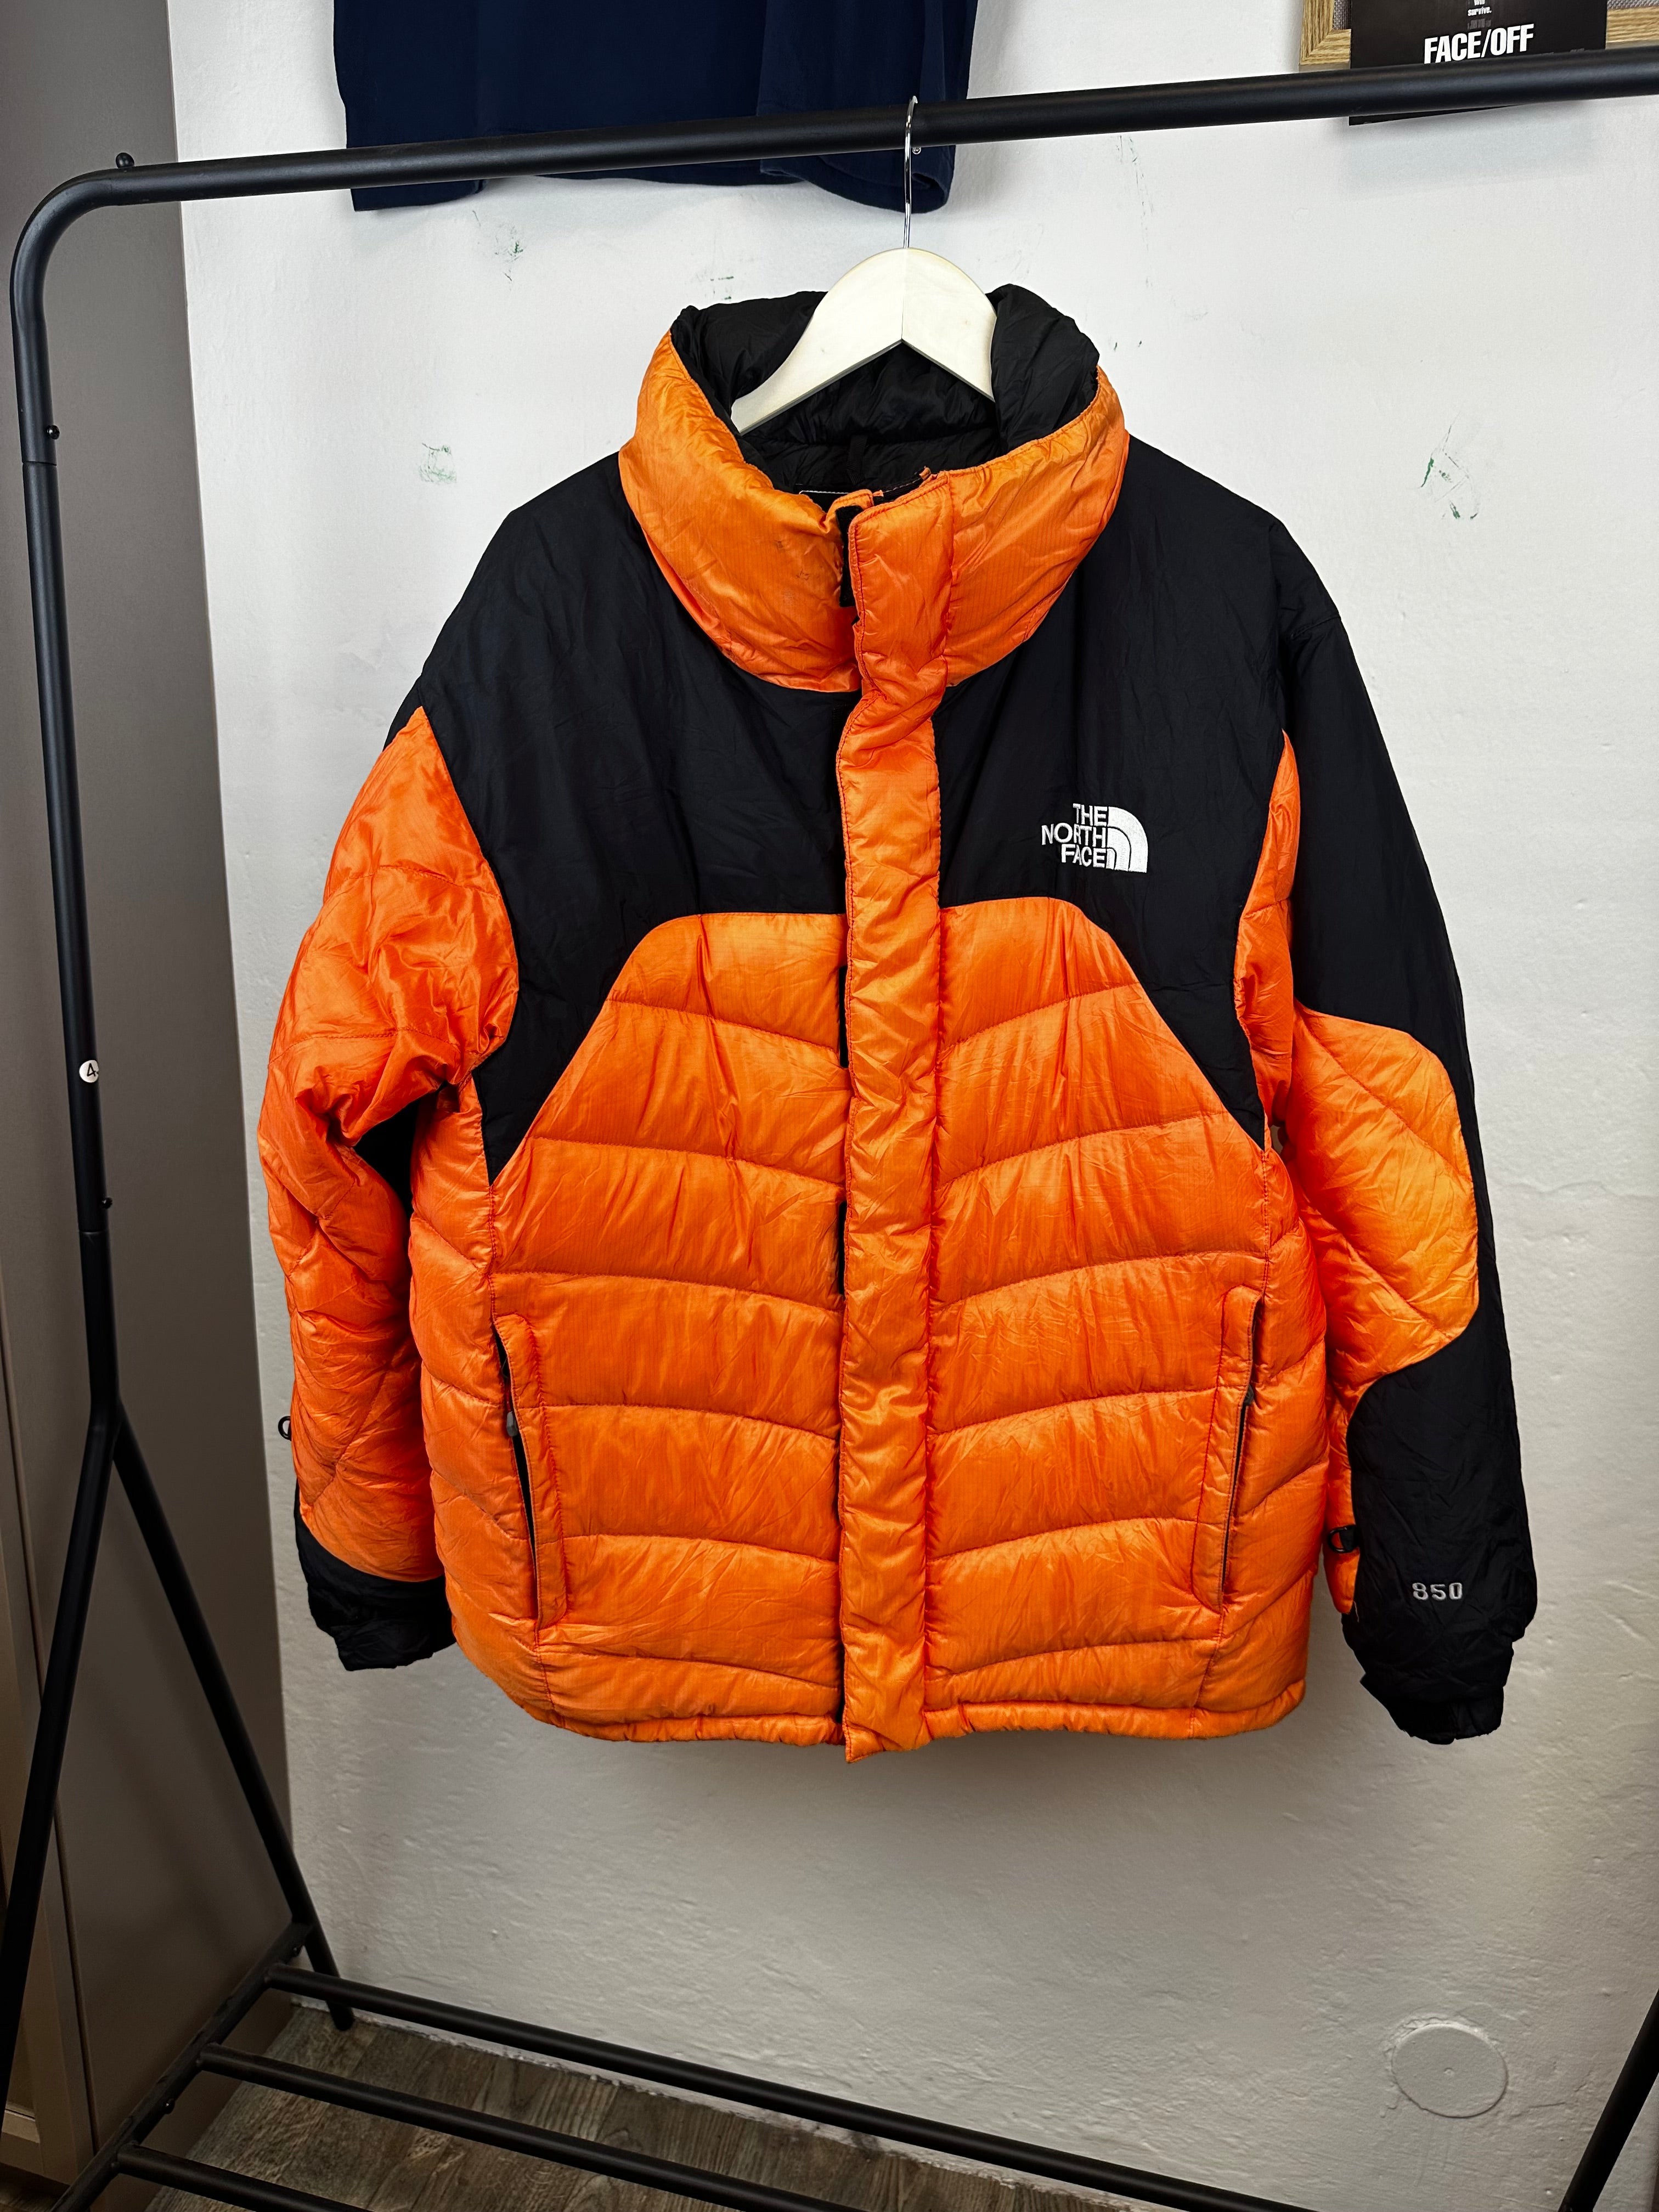 Vintage The North Face Summit Series jacket - size L